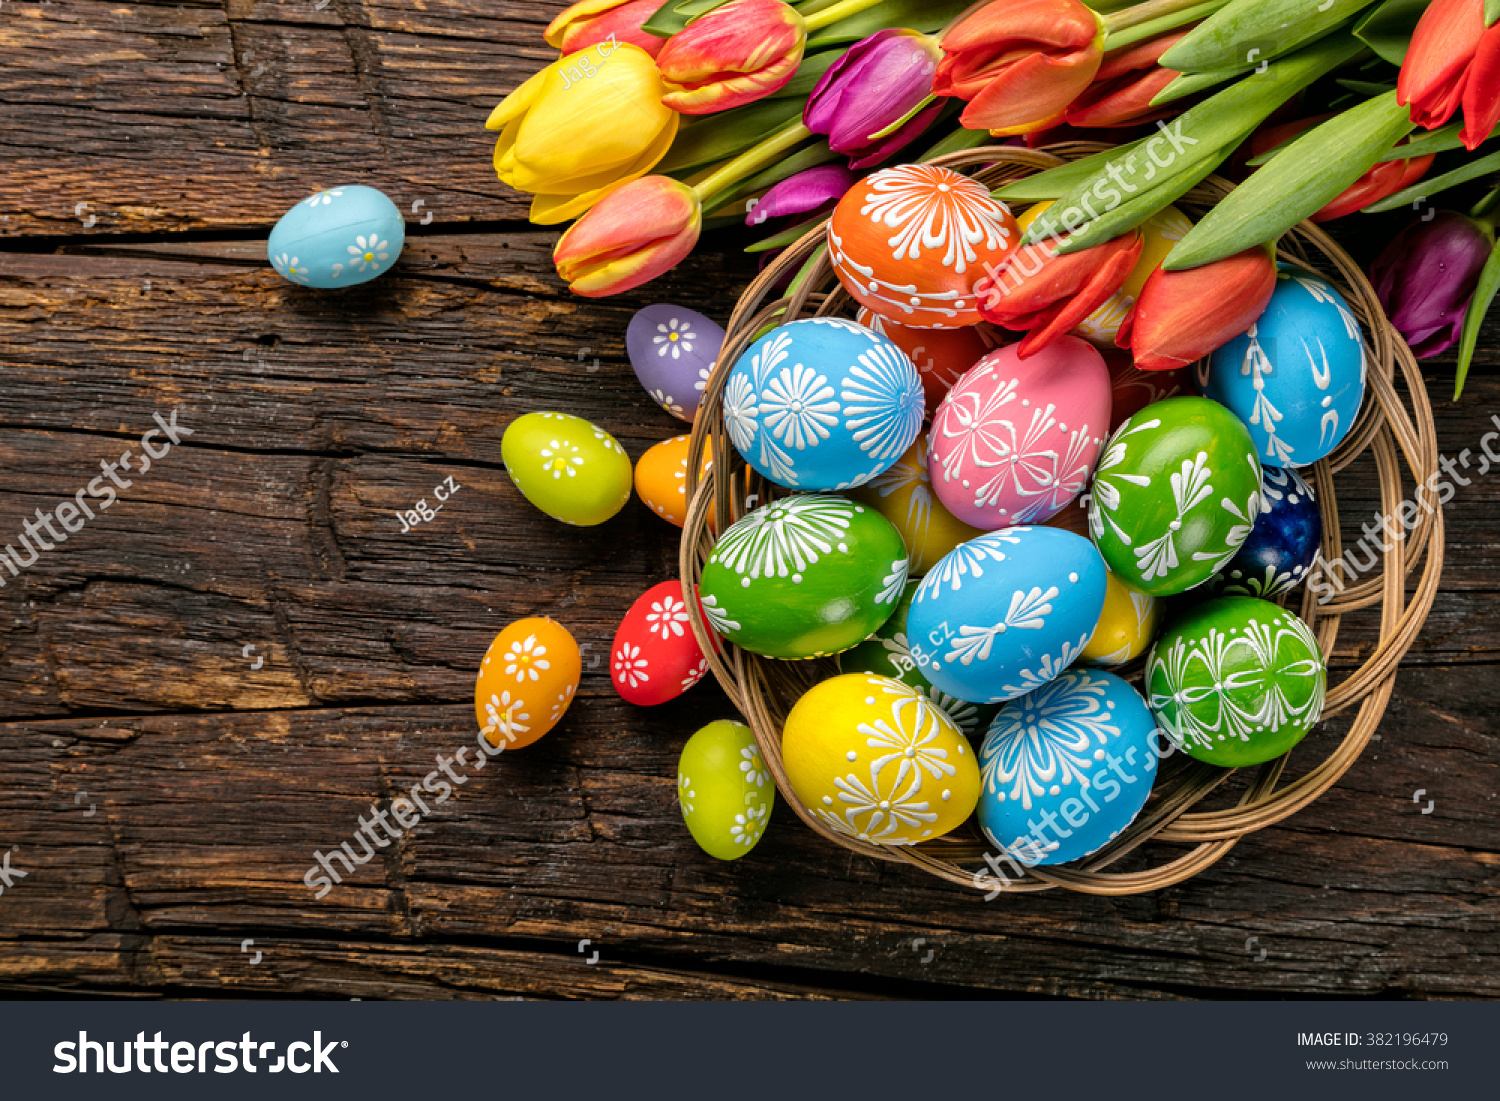 Easter eggs and tulips on wooden planks #382196479